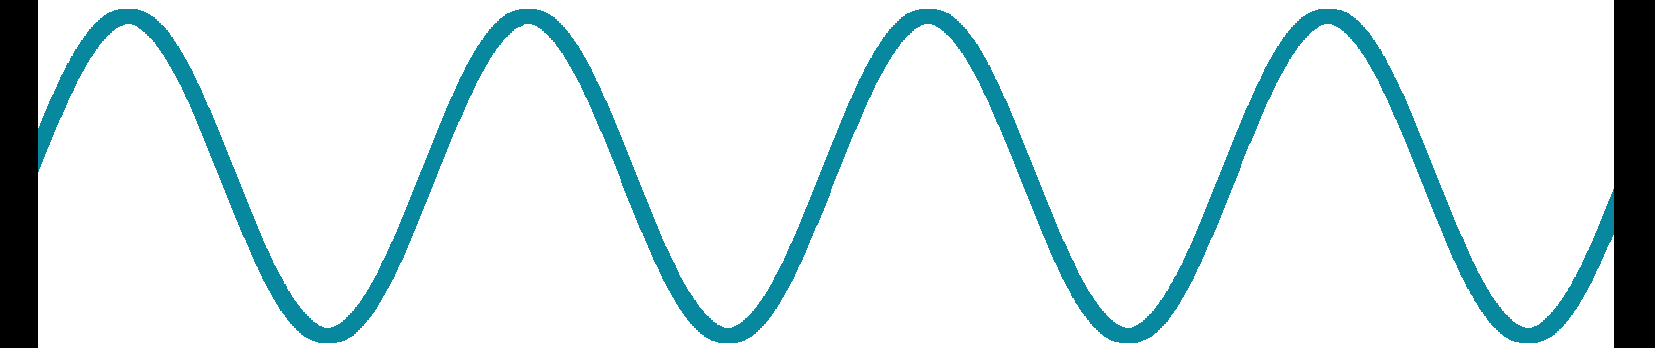 Waves clipart wave shape wave. Standing waweforms and room